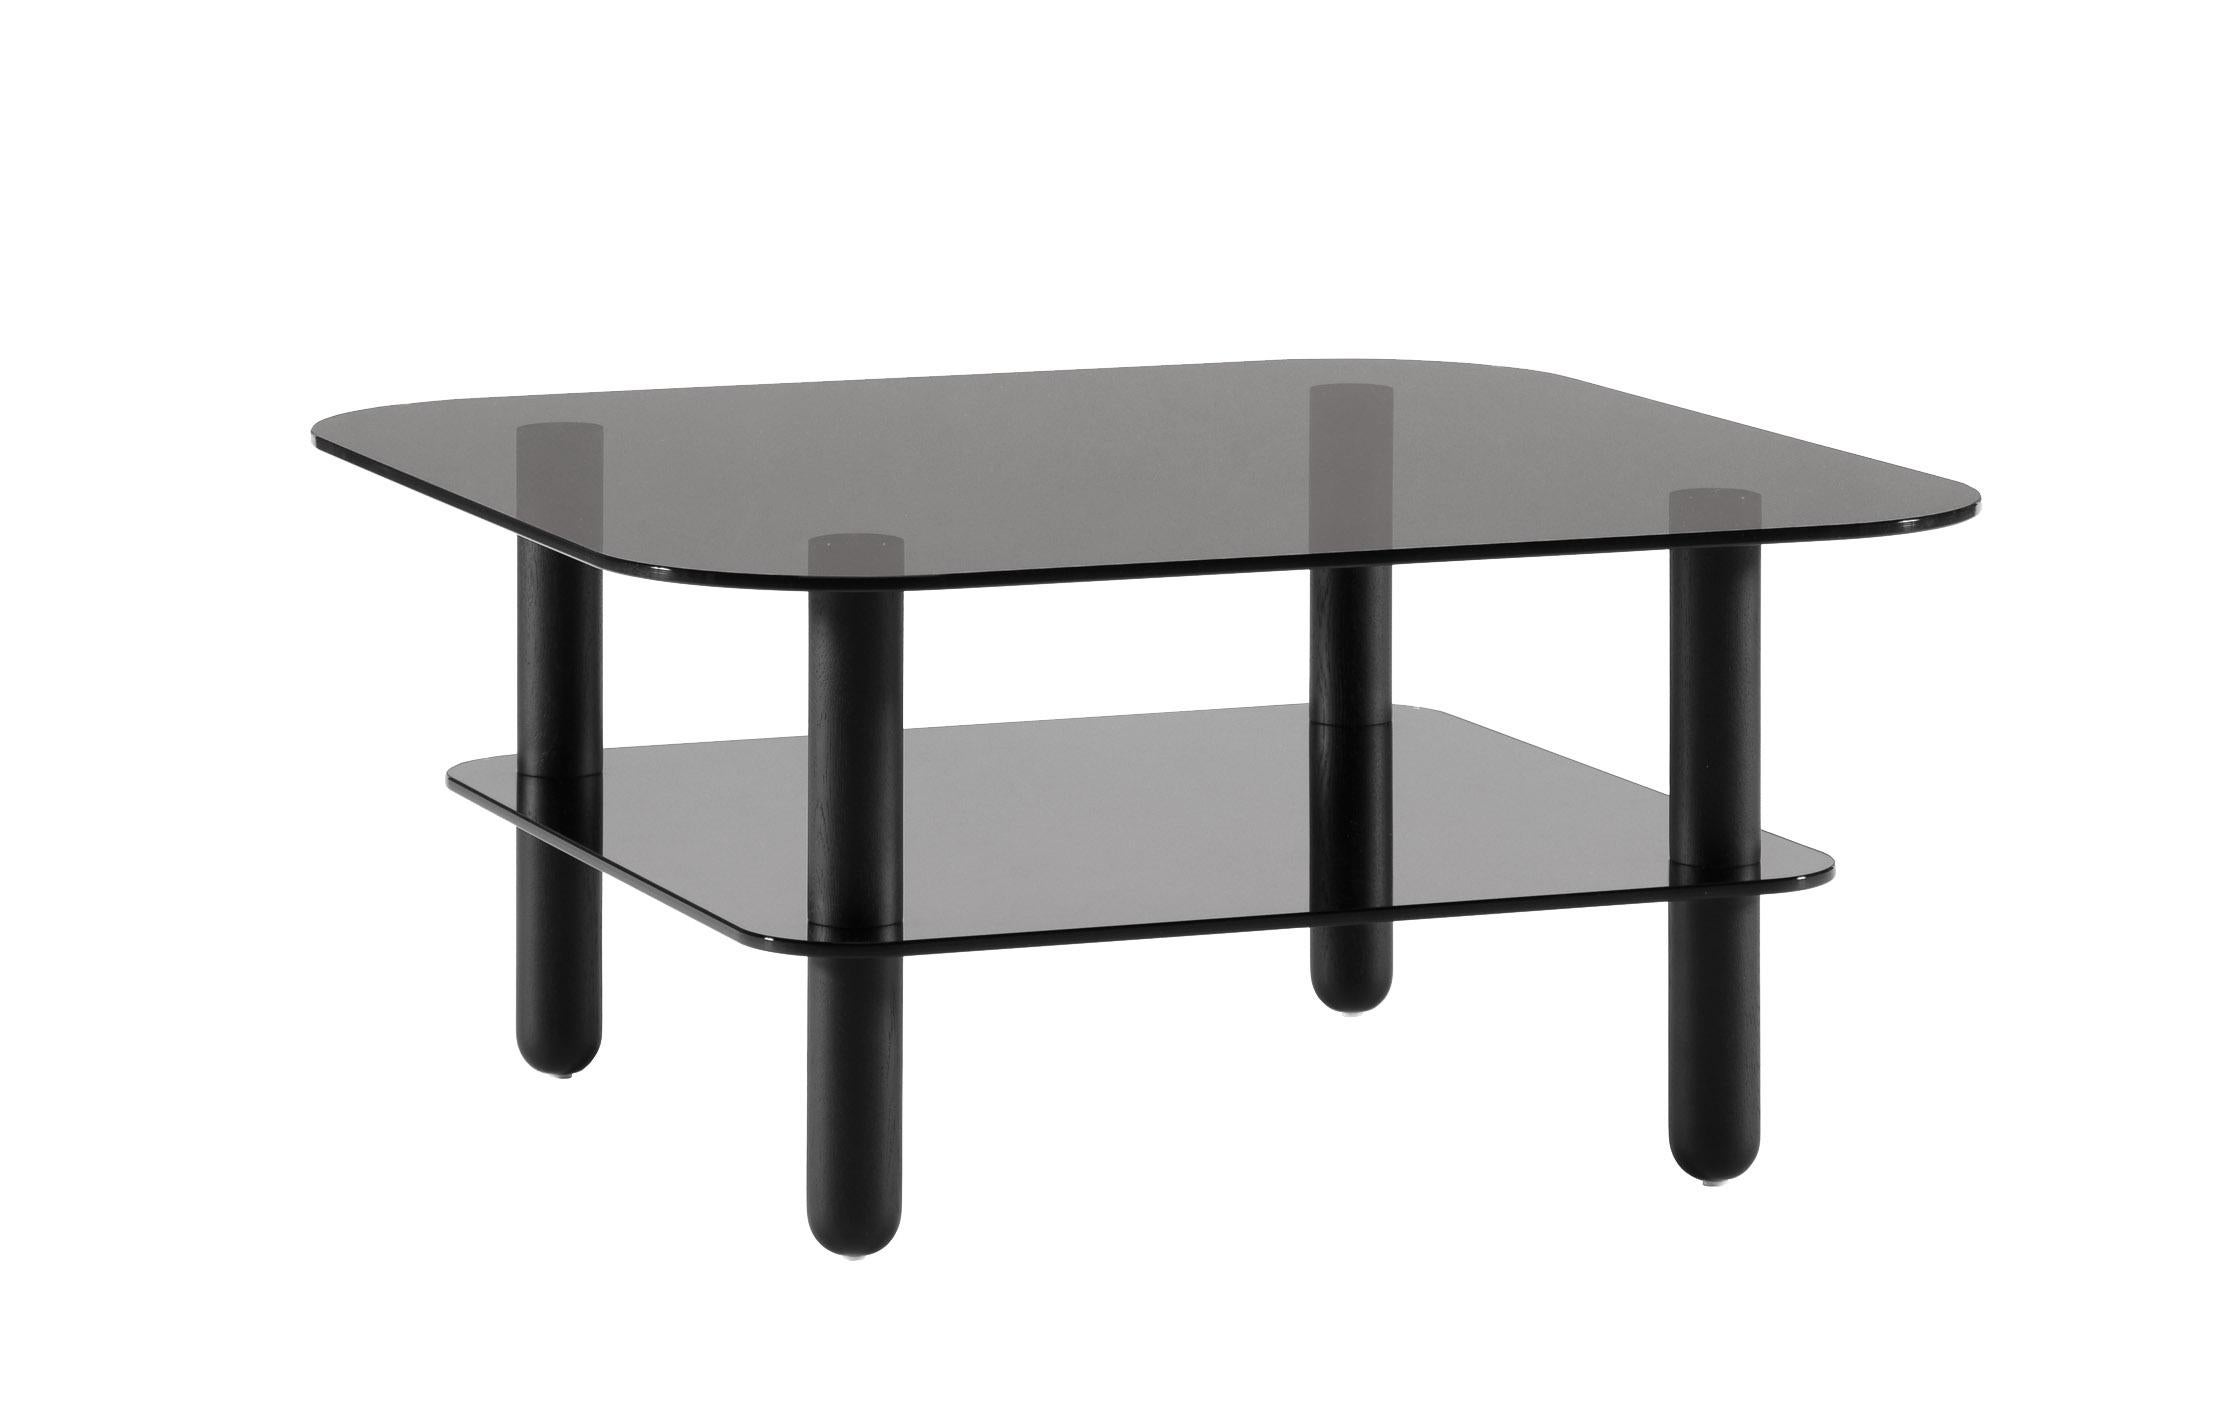 Big Sur Sofa Table High by Fogia
Designers: Simon Klenell & Kristoffer Sundin

Width: 95 cm  37 in
Depth: 95 cm  37 in
Height: 45 cm  18 in

Top glass : Top: 95 x 95 cm
Second glass : Shelf: 76 x 76 cm

In picture: Anthracite glass and black oak